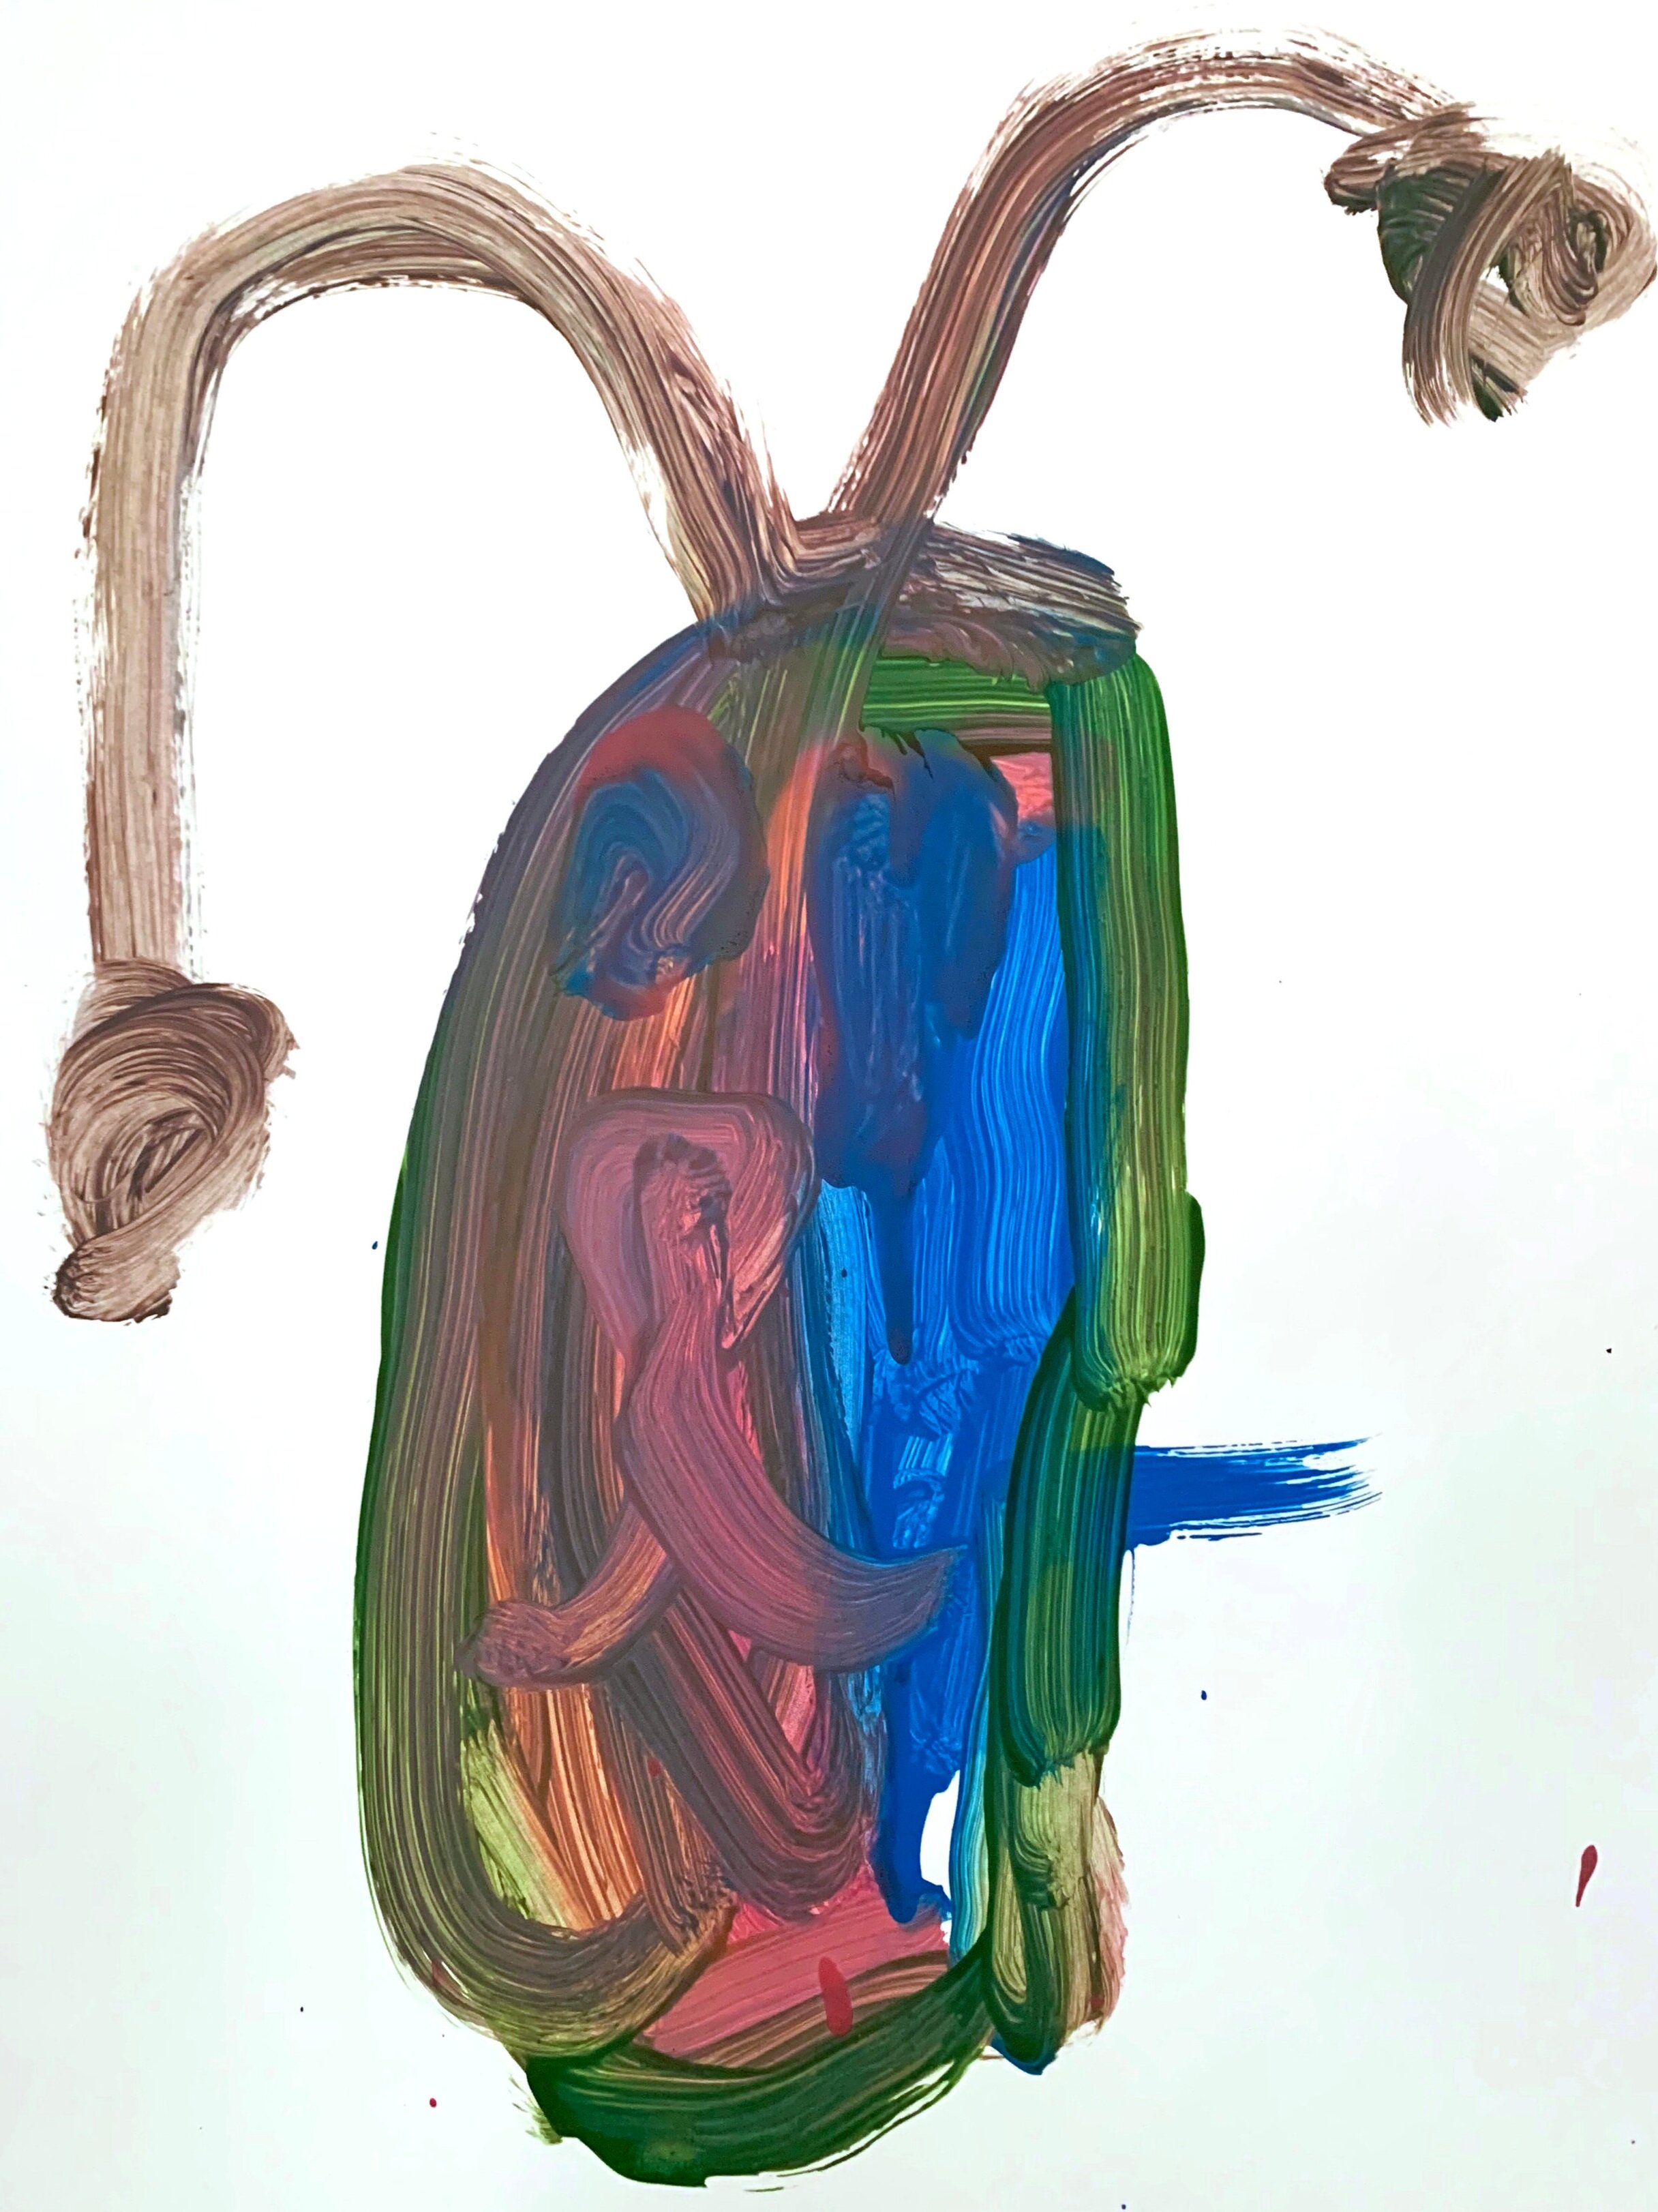 Bug with face by Stella. Easel painting with tempera.